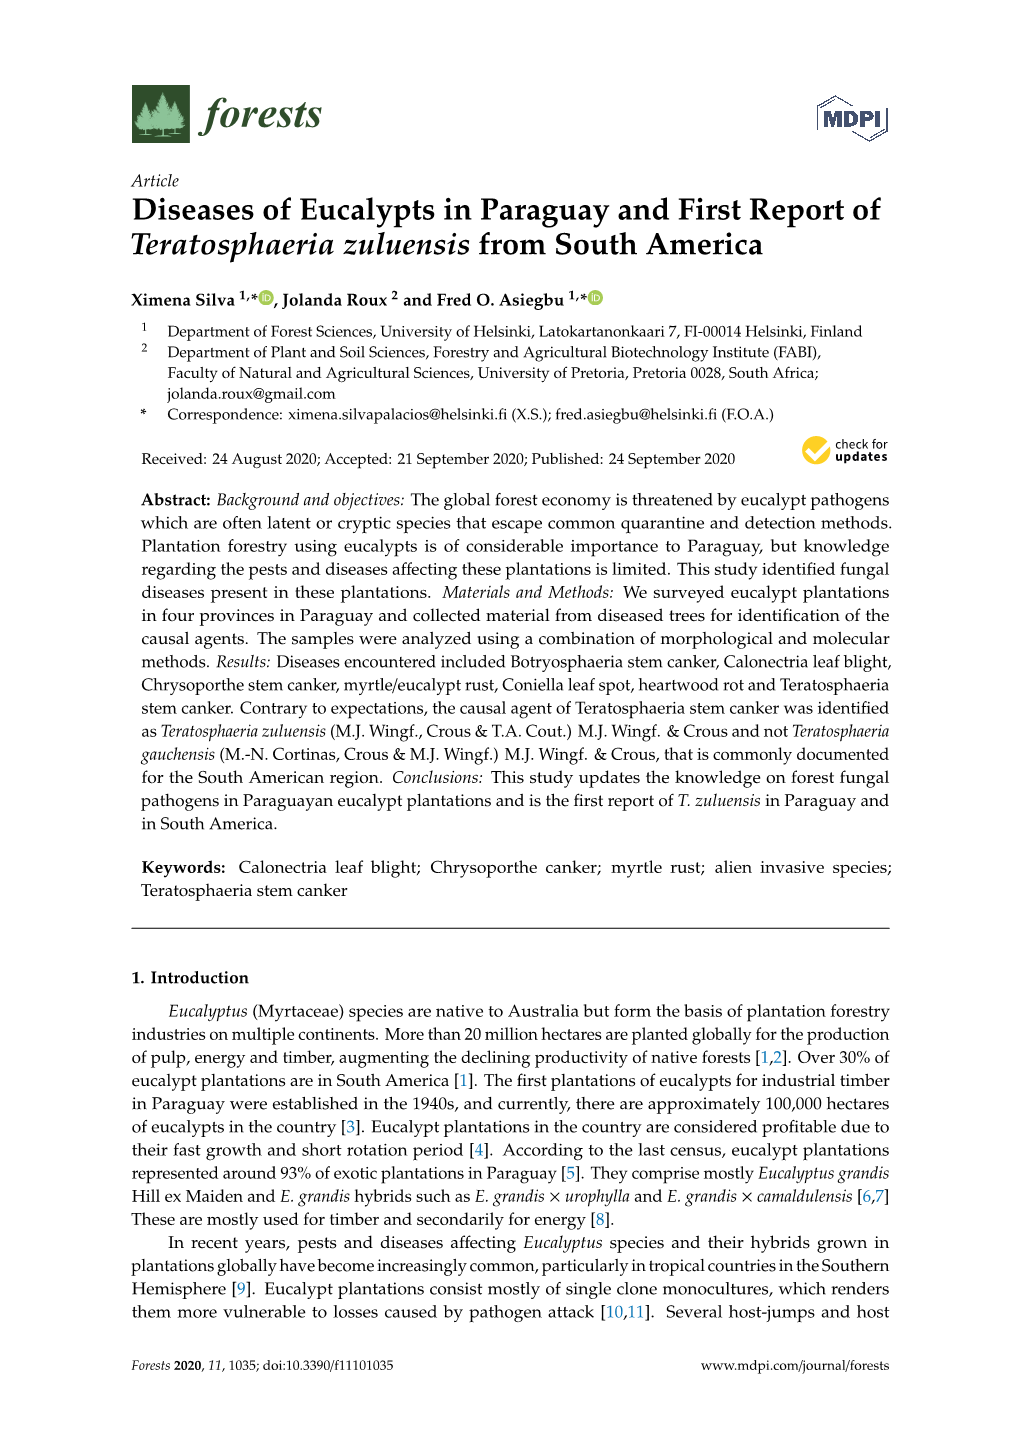 Diseases of Eucalypts in Paraguay and First Report of Teratosphaeria Zuluensis from South America